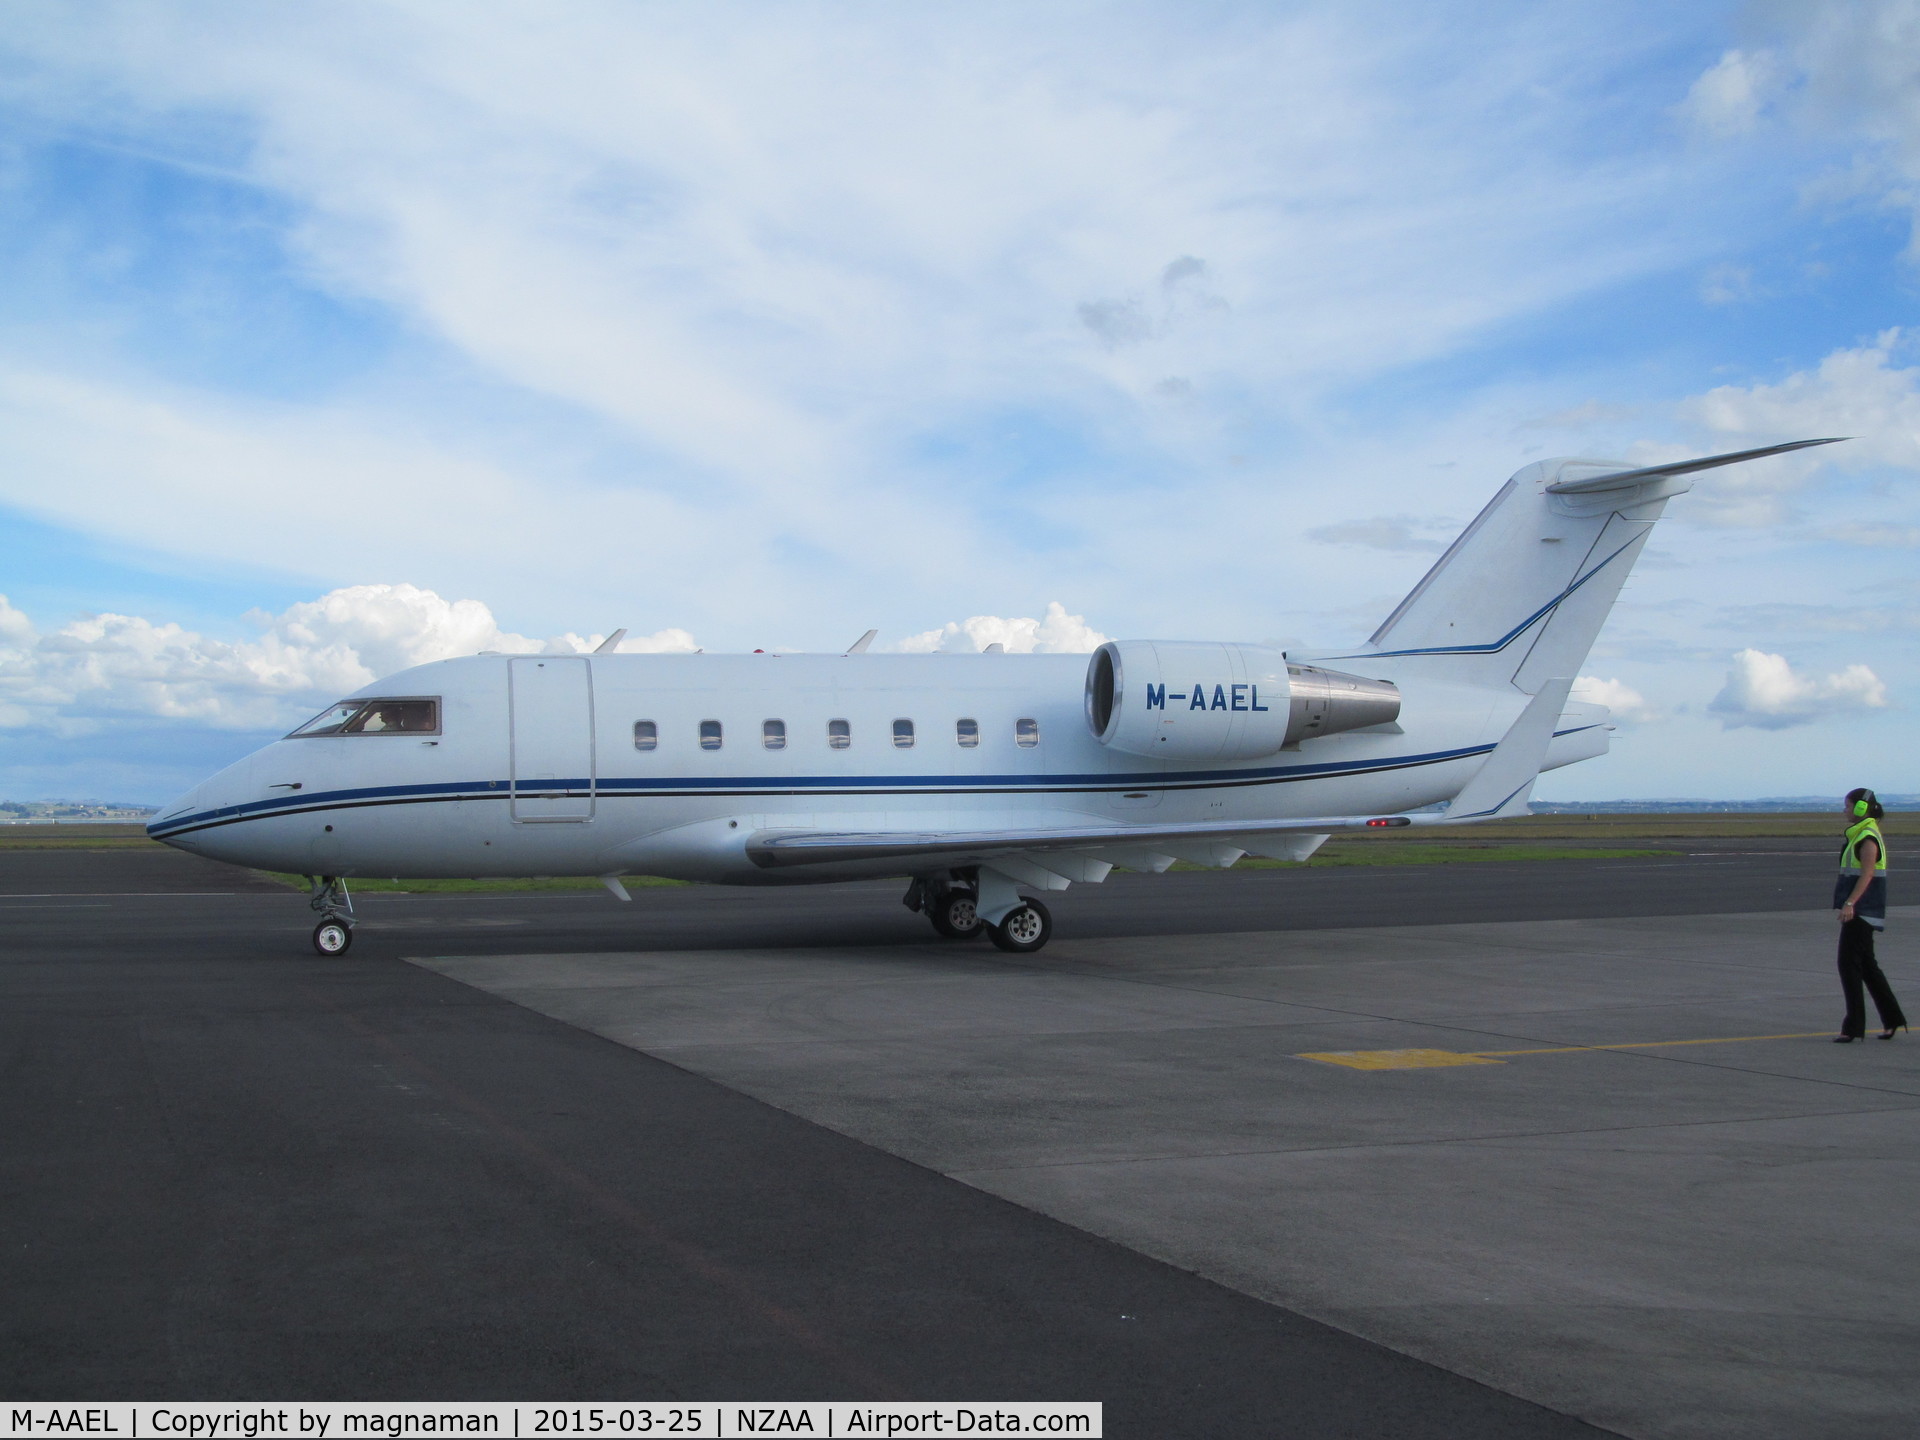 M-AAEL, 2005 Bombardier Challenger 604 (CL-600-2B16) C/N 5604, parked up - yet to disembark